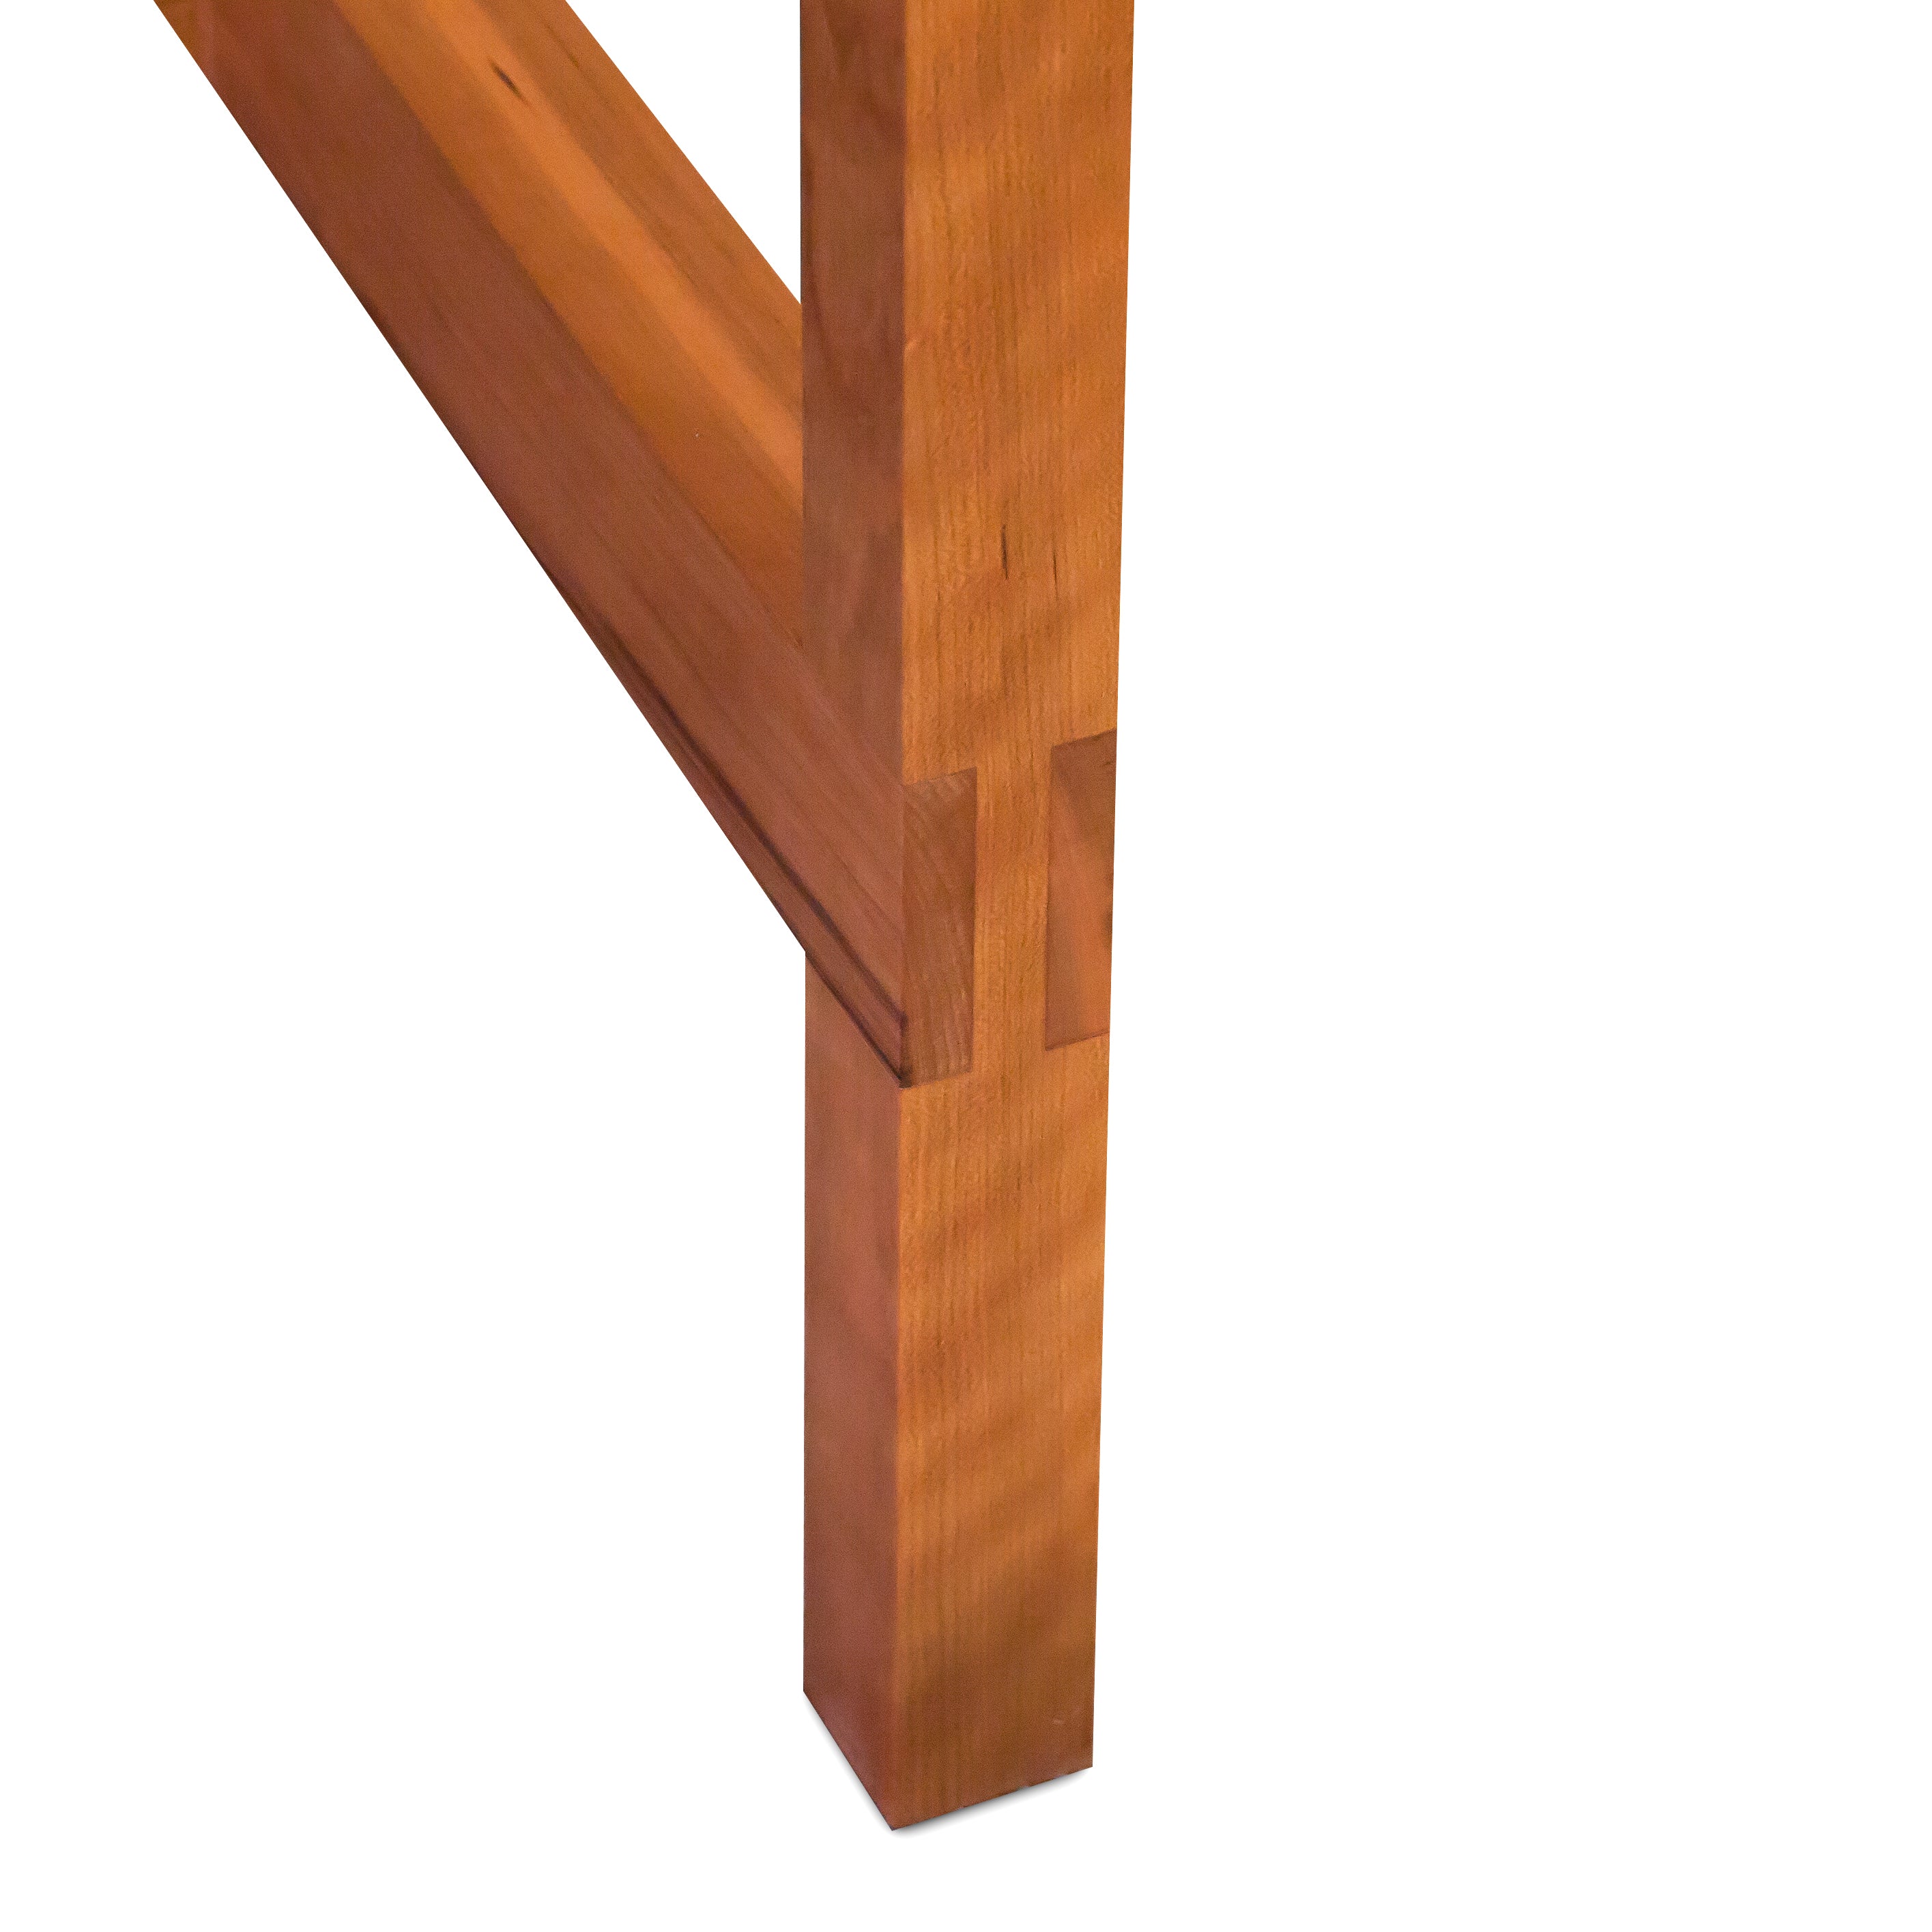 Mortise and tenon joinery in solid cherry on the Union Dining Table